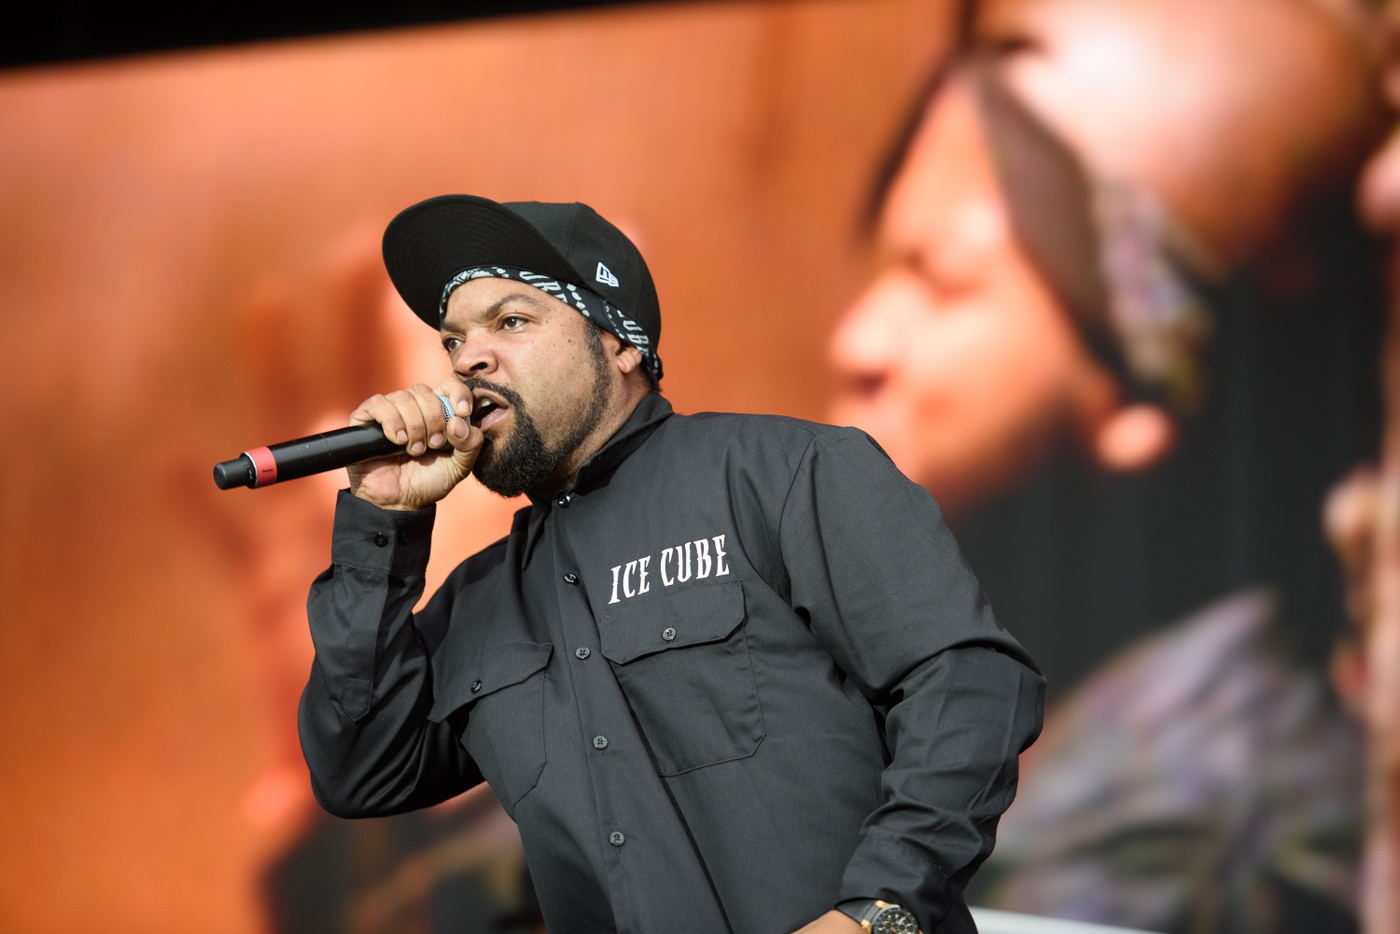 Ice Cube (O’Shea Jackson) performs at Wild Life Festival 2016 at the Brighton City Airport in Shoreham-by-Sea